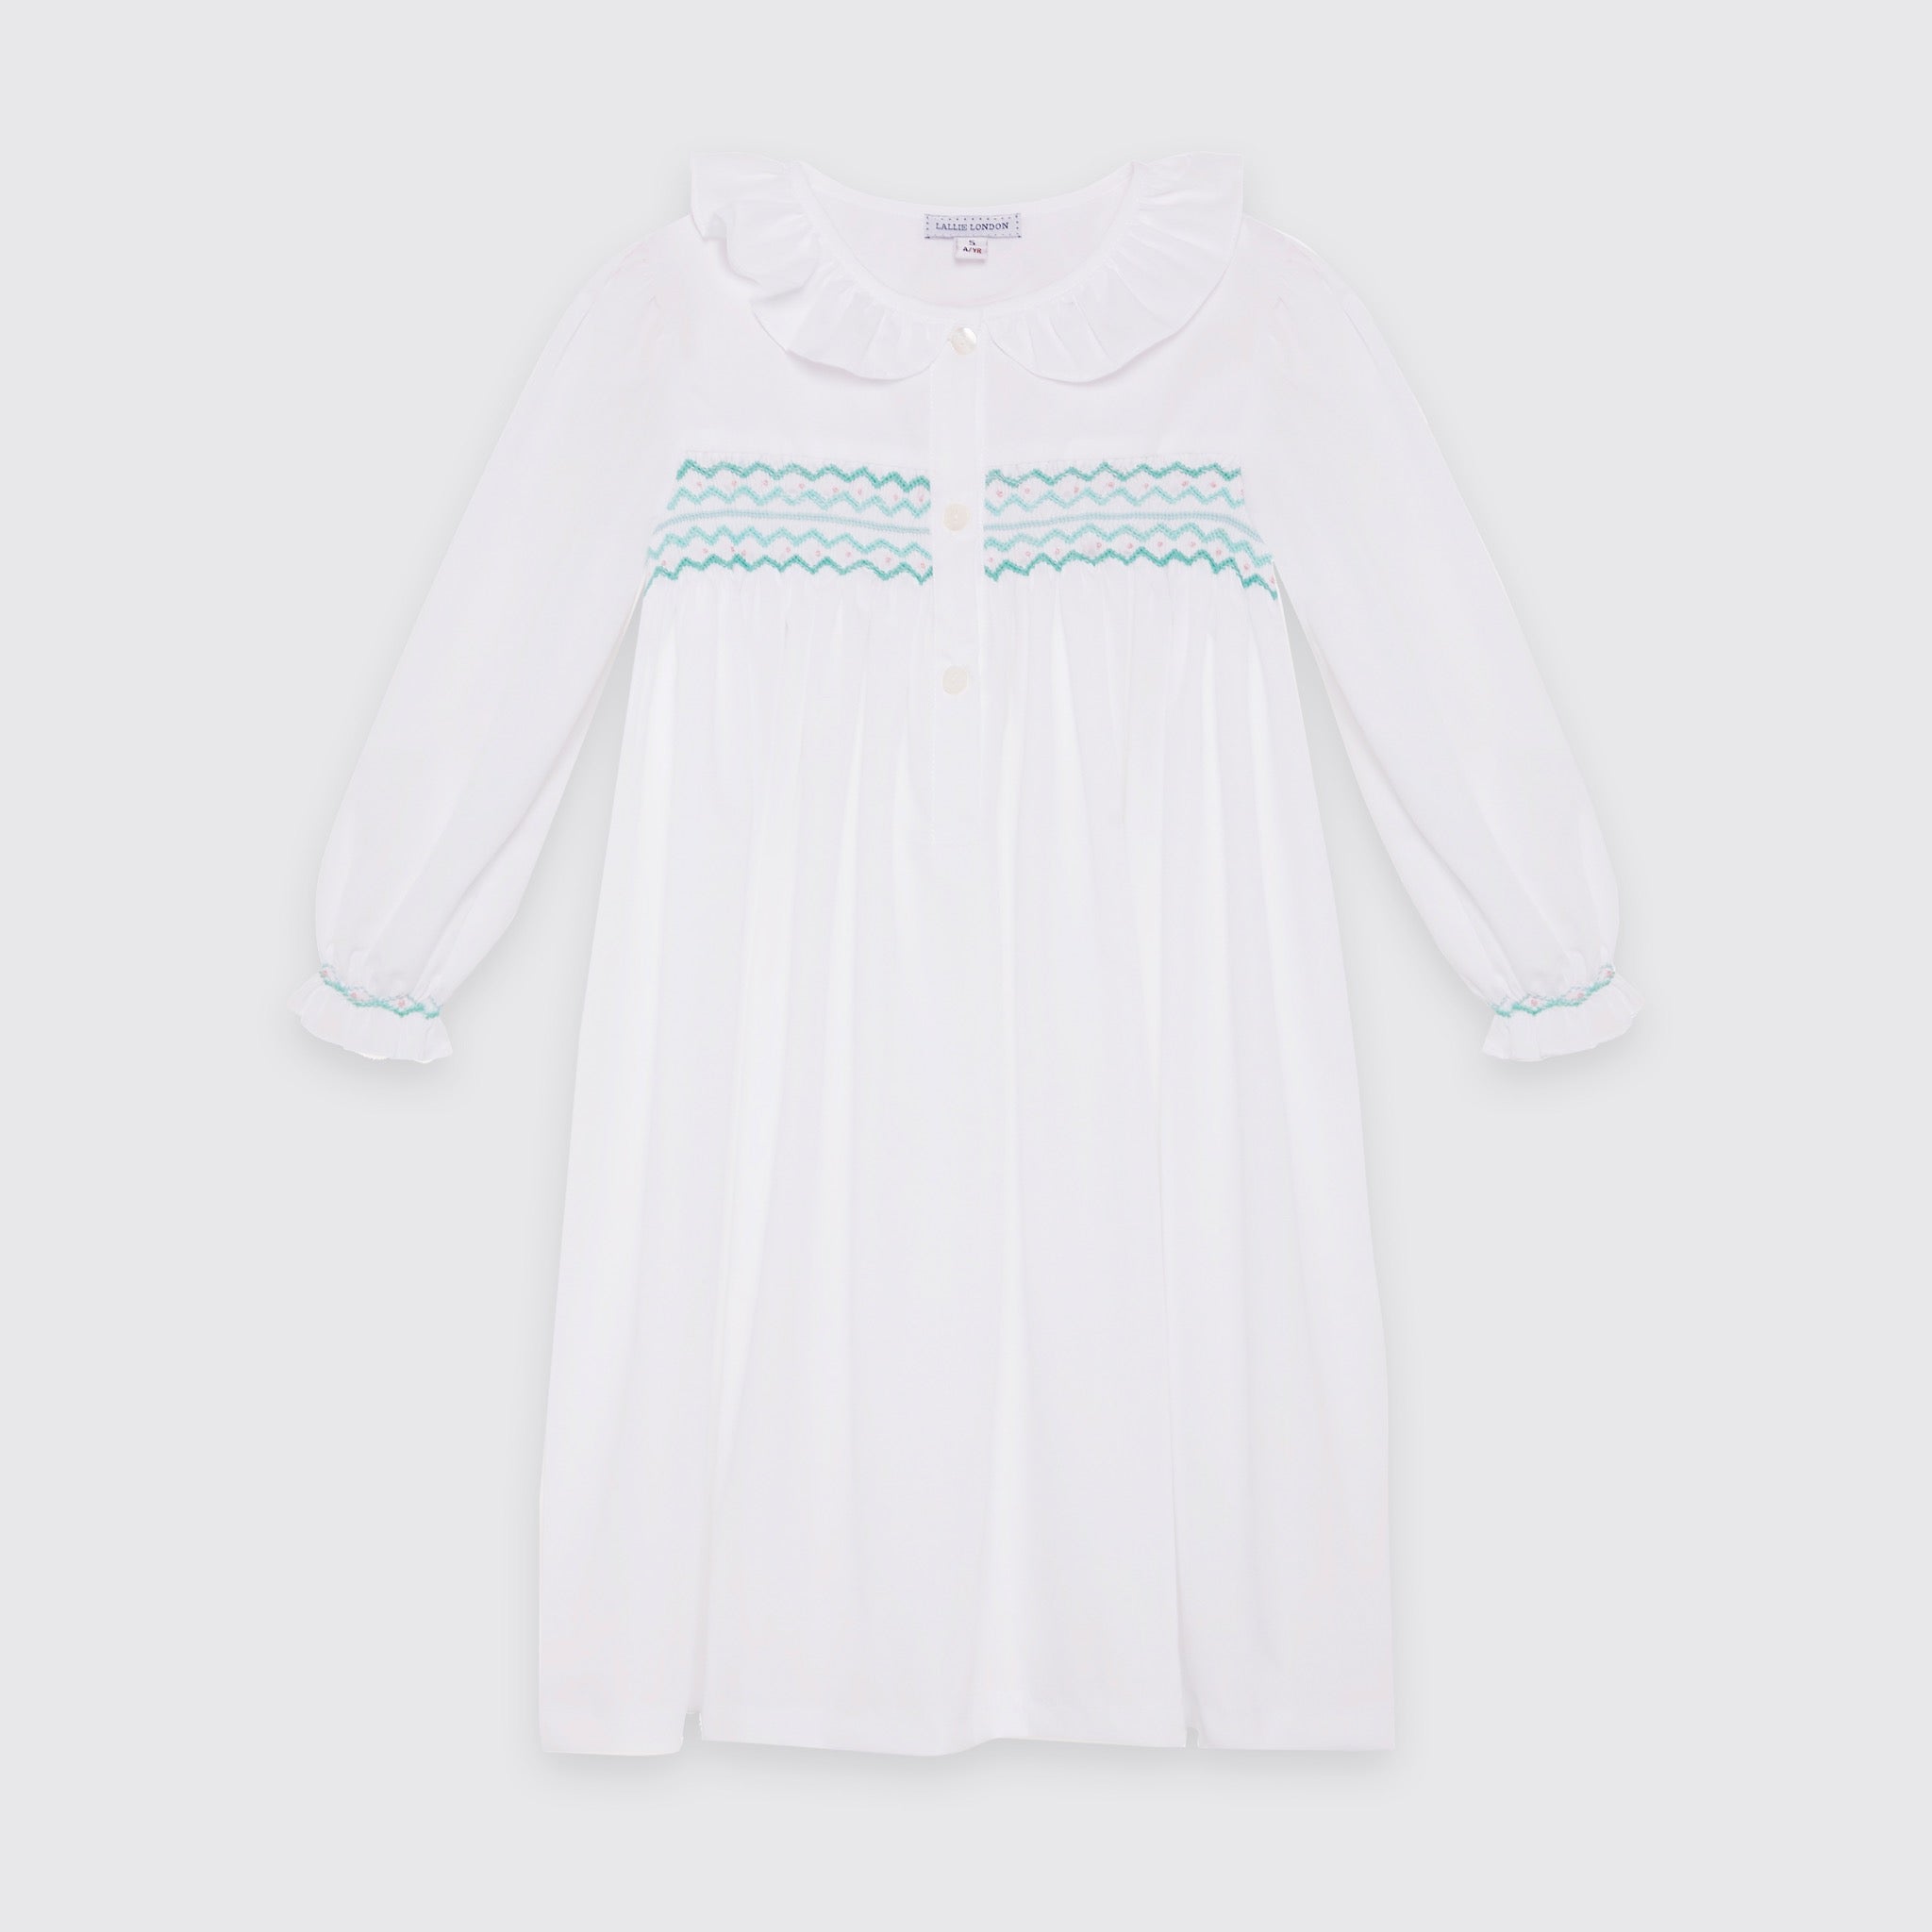 White nightdress with hand smocked.  Smocking panel in mint green and pale pink.  Traditional nightwear for children.  Smocked cuff. Frill collar cotton nightie 